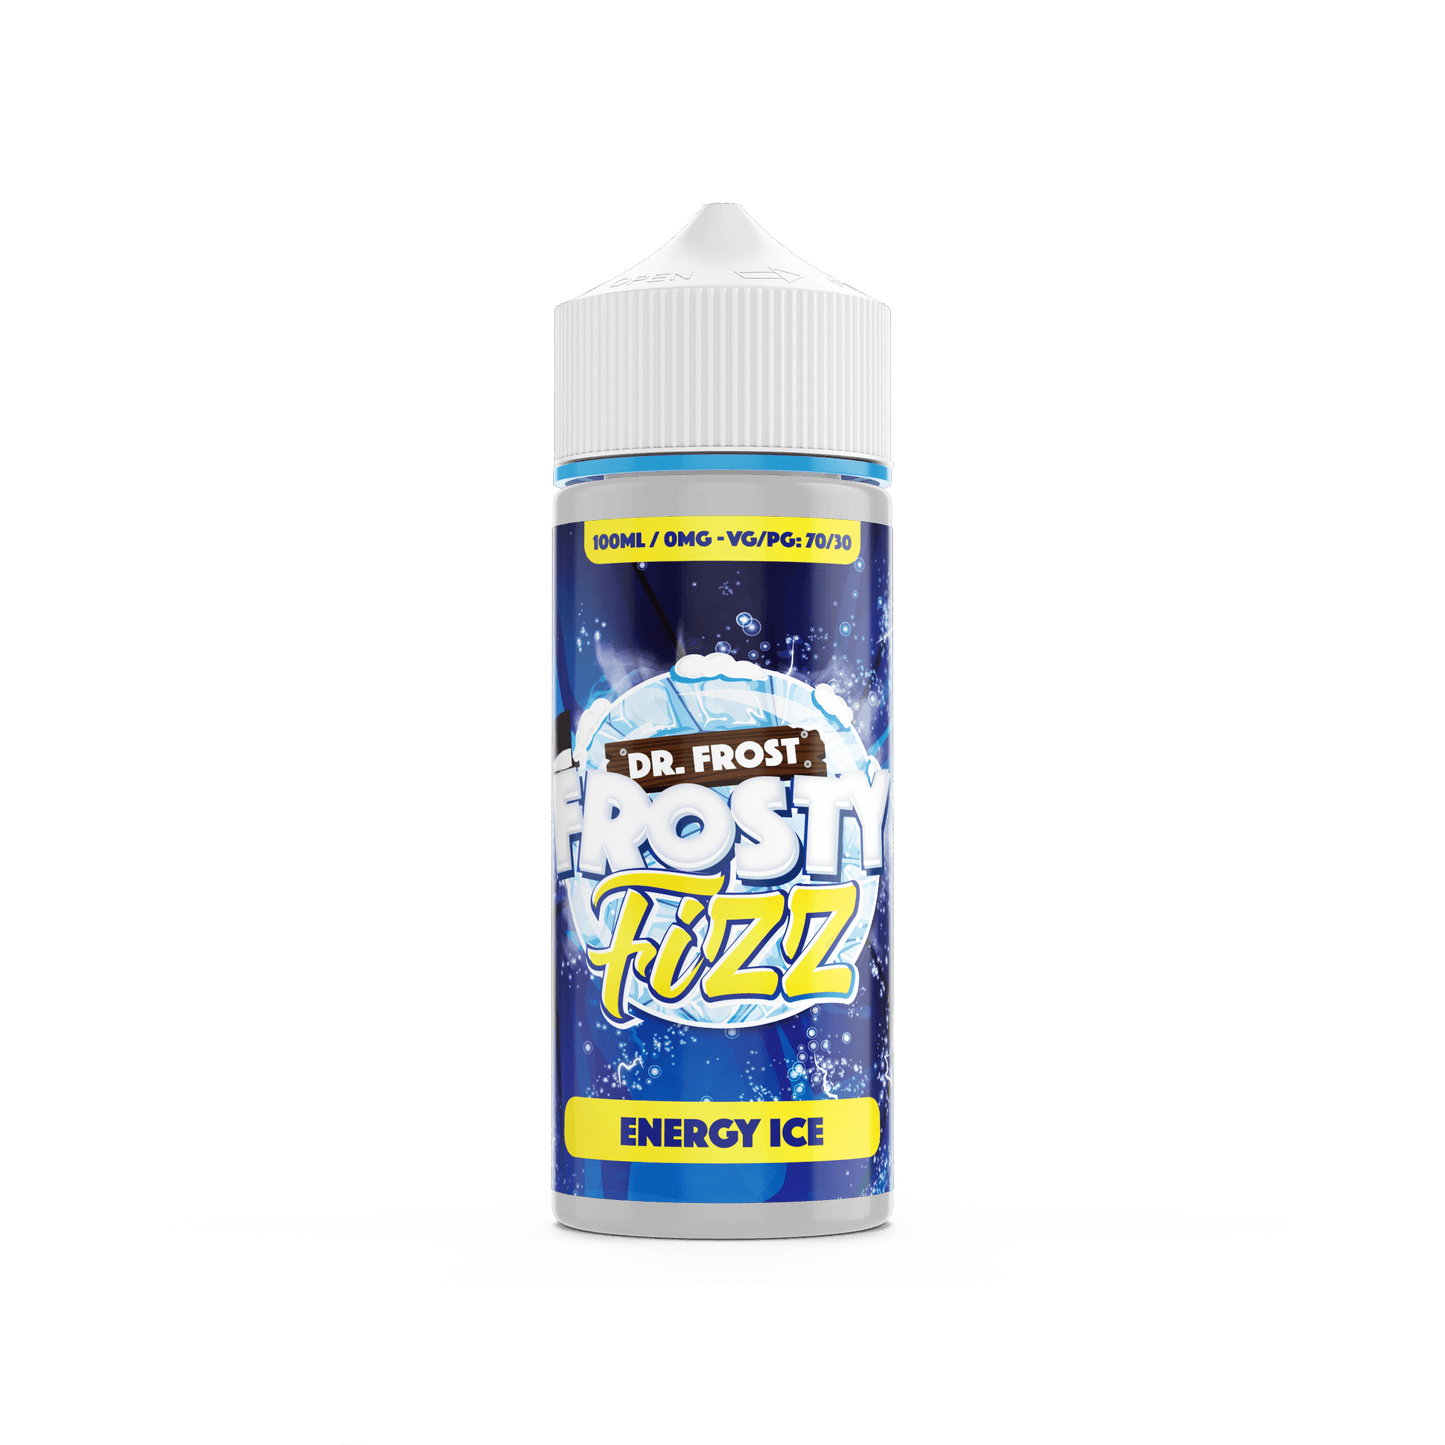 Dr.Frost - Energy ice 100ml - Vaper Aid